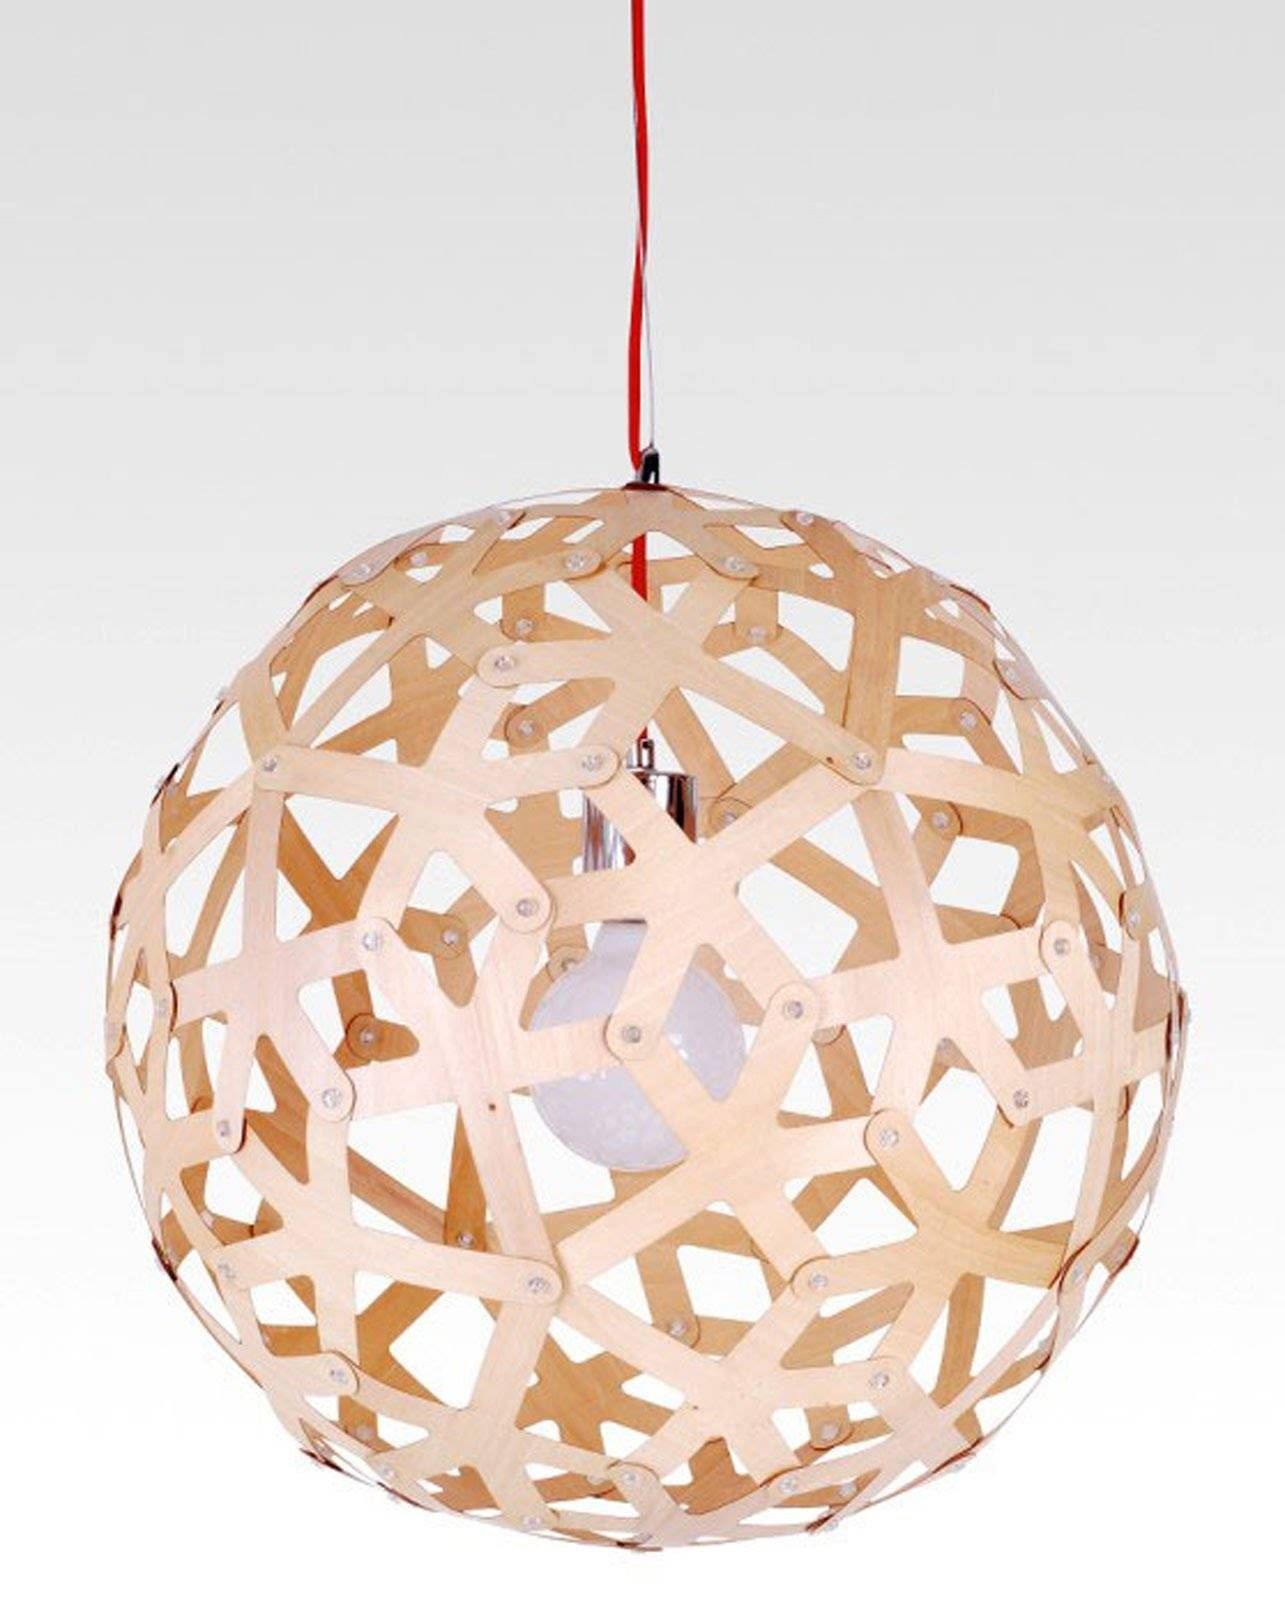 Buy Wood Pendant Light In Melbourne [sphere] – Youtube With Regard To Wooden Pendant Lights (Photo 11 of 15)